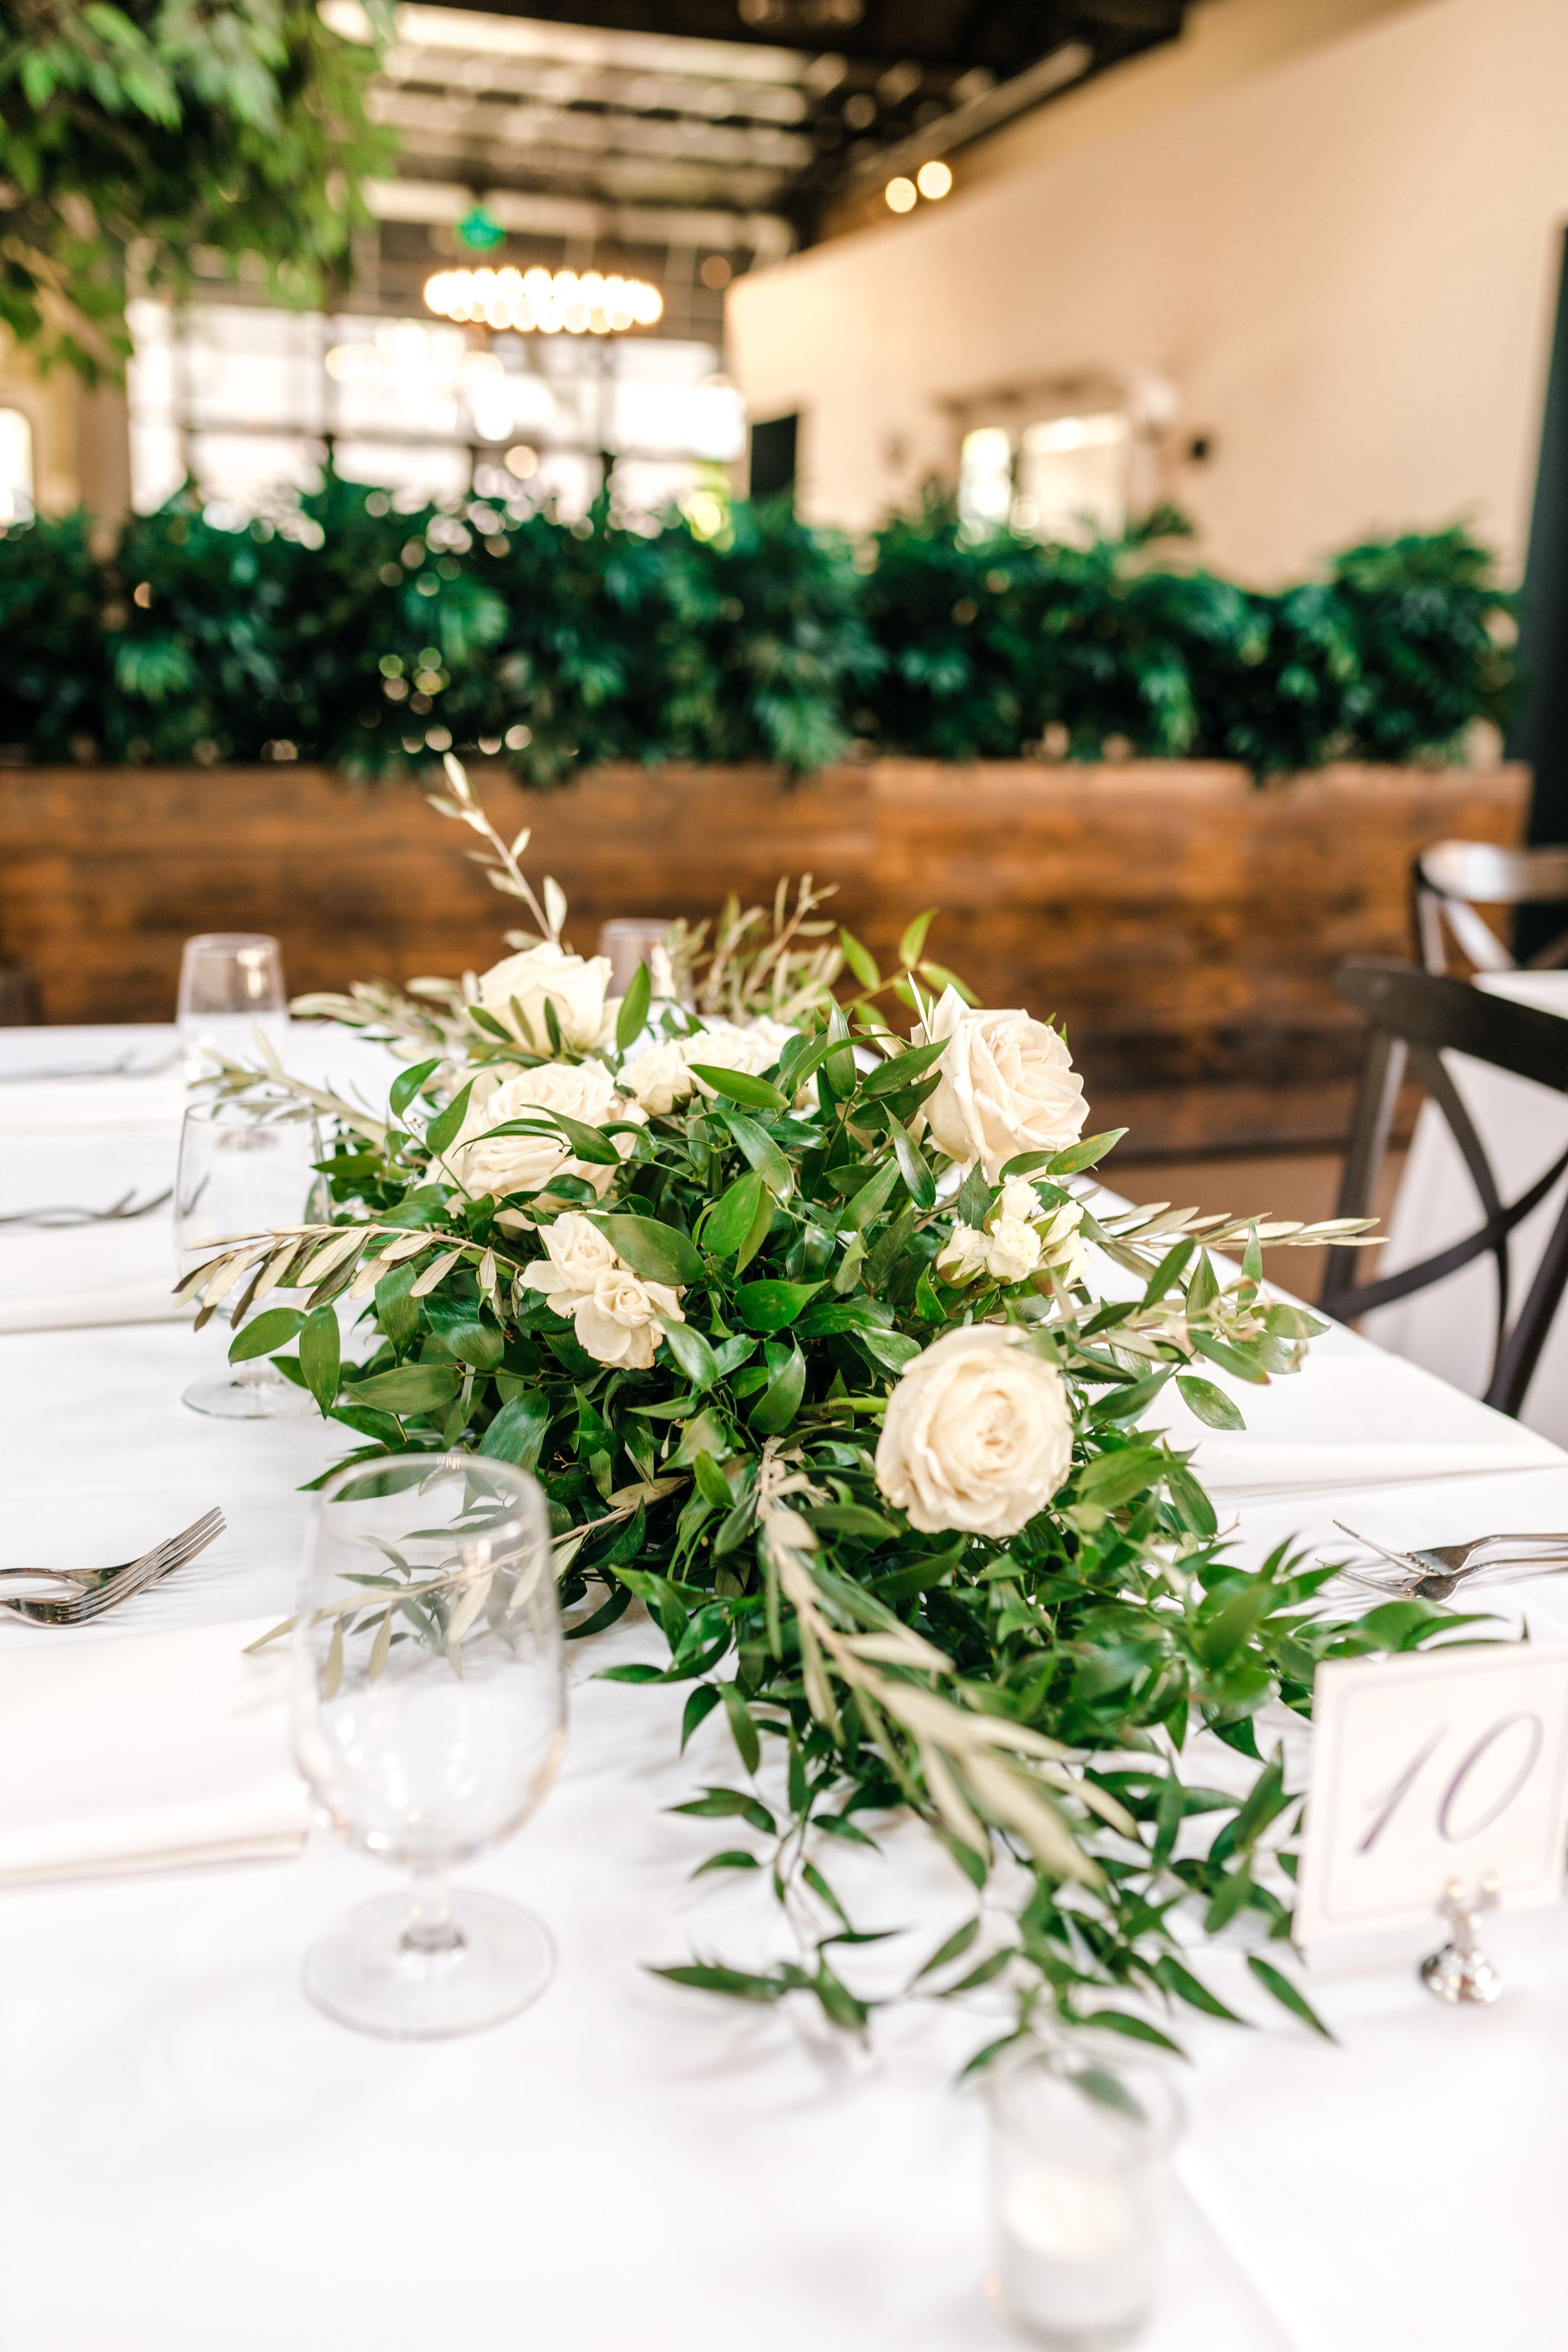 ivory-and-beau-wedding-and-florals-annelise-and-preston-wedding-blog-savannah-wedding-savannah-wedding-coordinator-savannah-florsit-wedding-florist-southern-wedding-forsyth-park-fountain-soho-south-savannah-wedding-gmp201993452-140.jpg